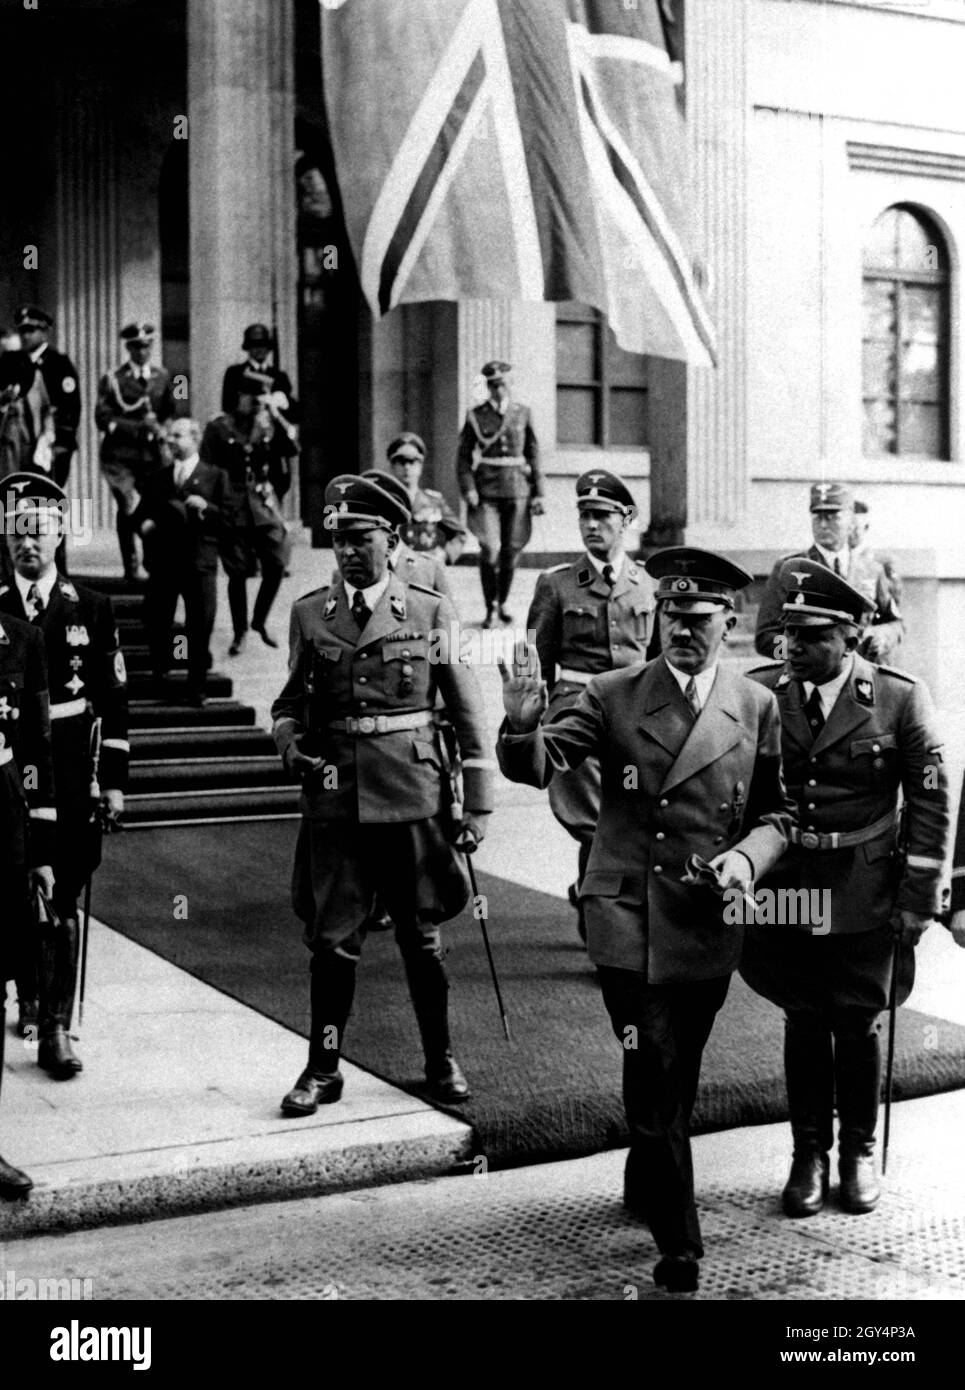 The ear of the Nazi leader, especially in the last years, was held by Martin Bormann, who became one of the most influential Nazi functionaries, here at the Munich Conference in front of the Führerbau (Königsplatz) in September 1938. Bormann gradually ousted competitors such as Wilhelm Brückner and from 1941 saw himself in one of the most influential positions in the NS. Adjudant Julius Schaub on the left, Karl Wolff on the far left. [automated translation] Stock Photo